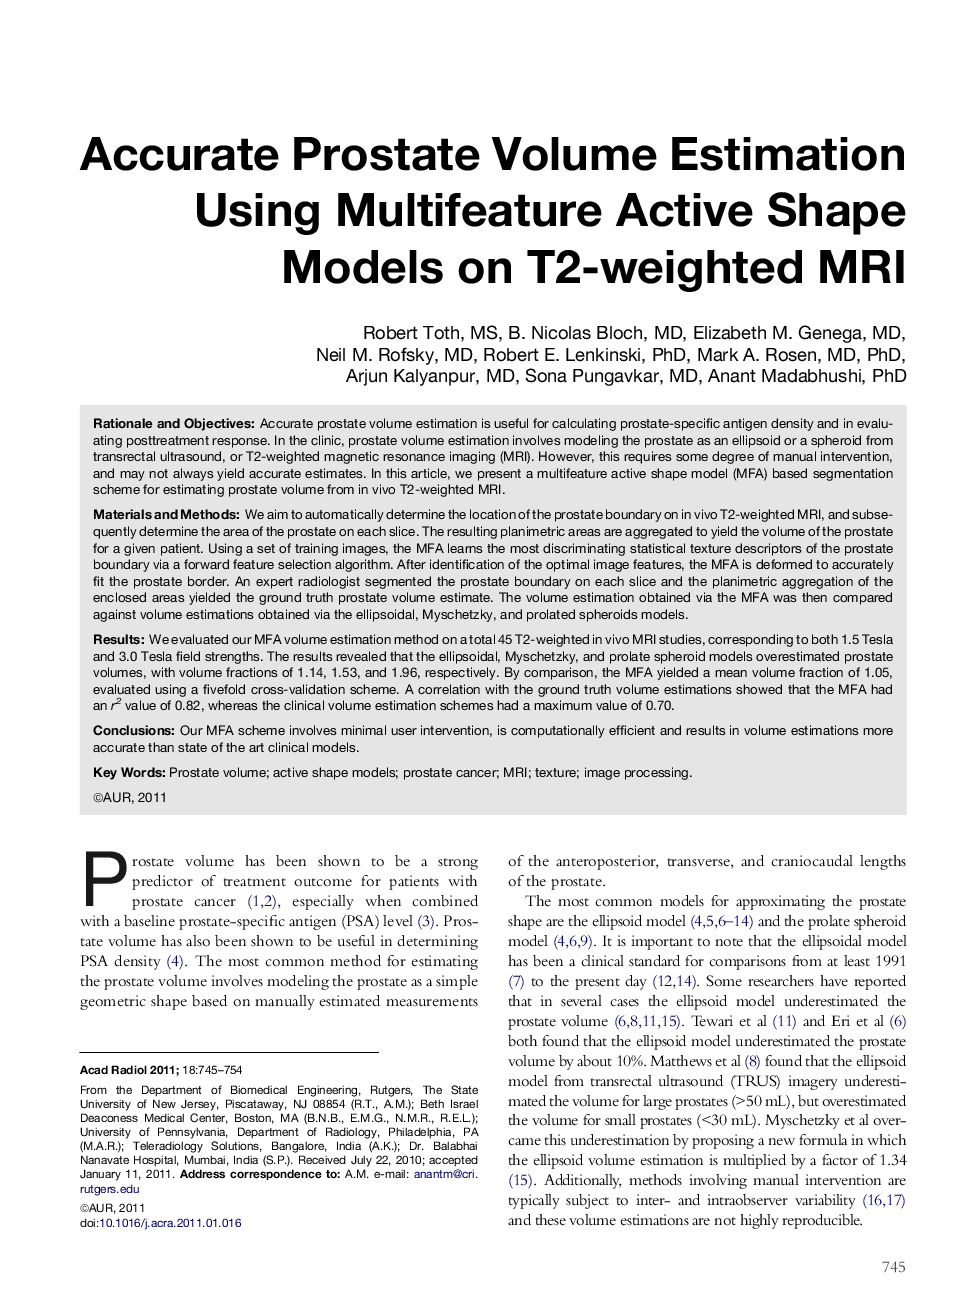 Accurate Prostate Volume Estimation Using Multifeature Active Shape Models on T2-weighted MRI